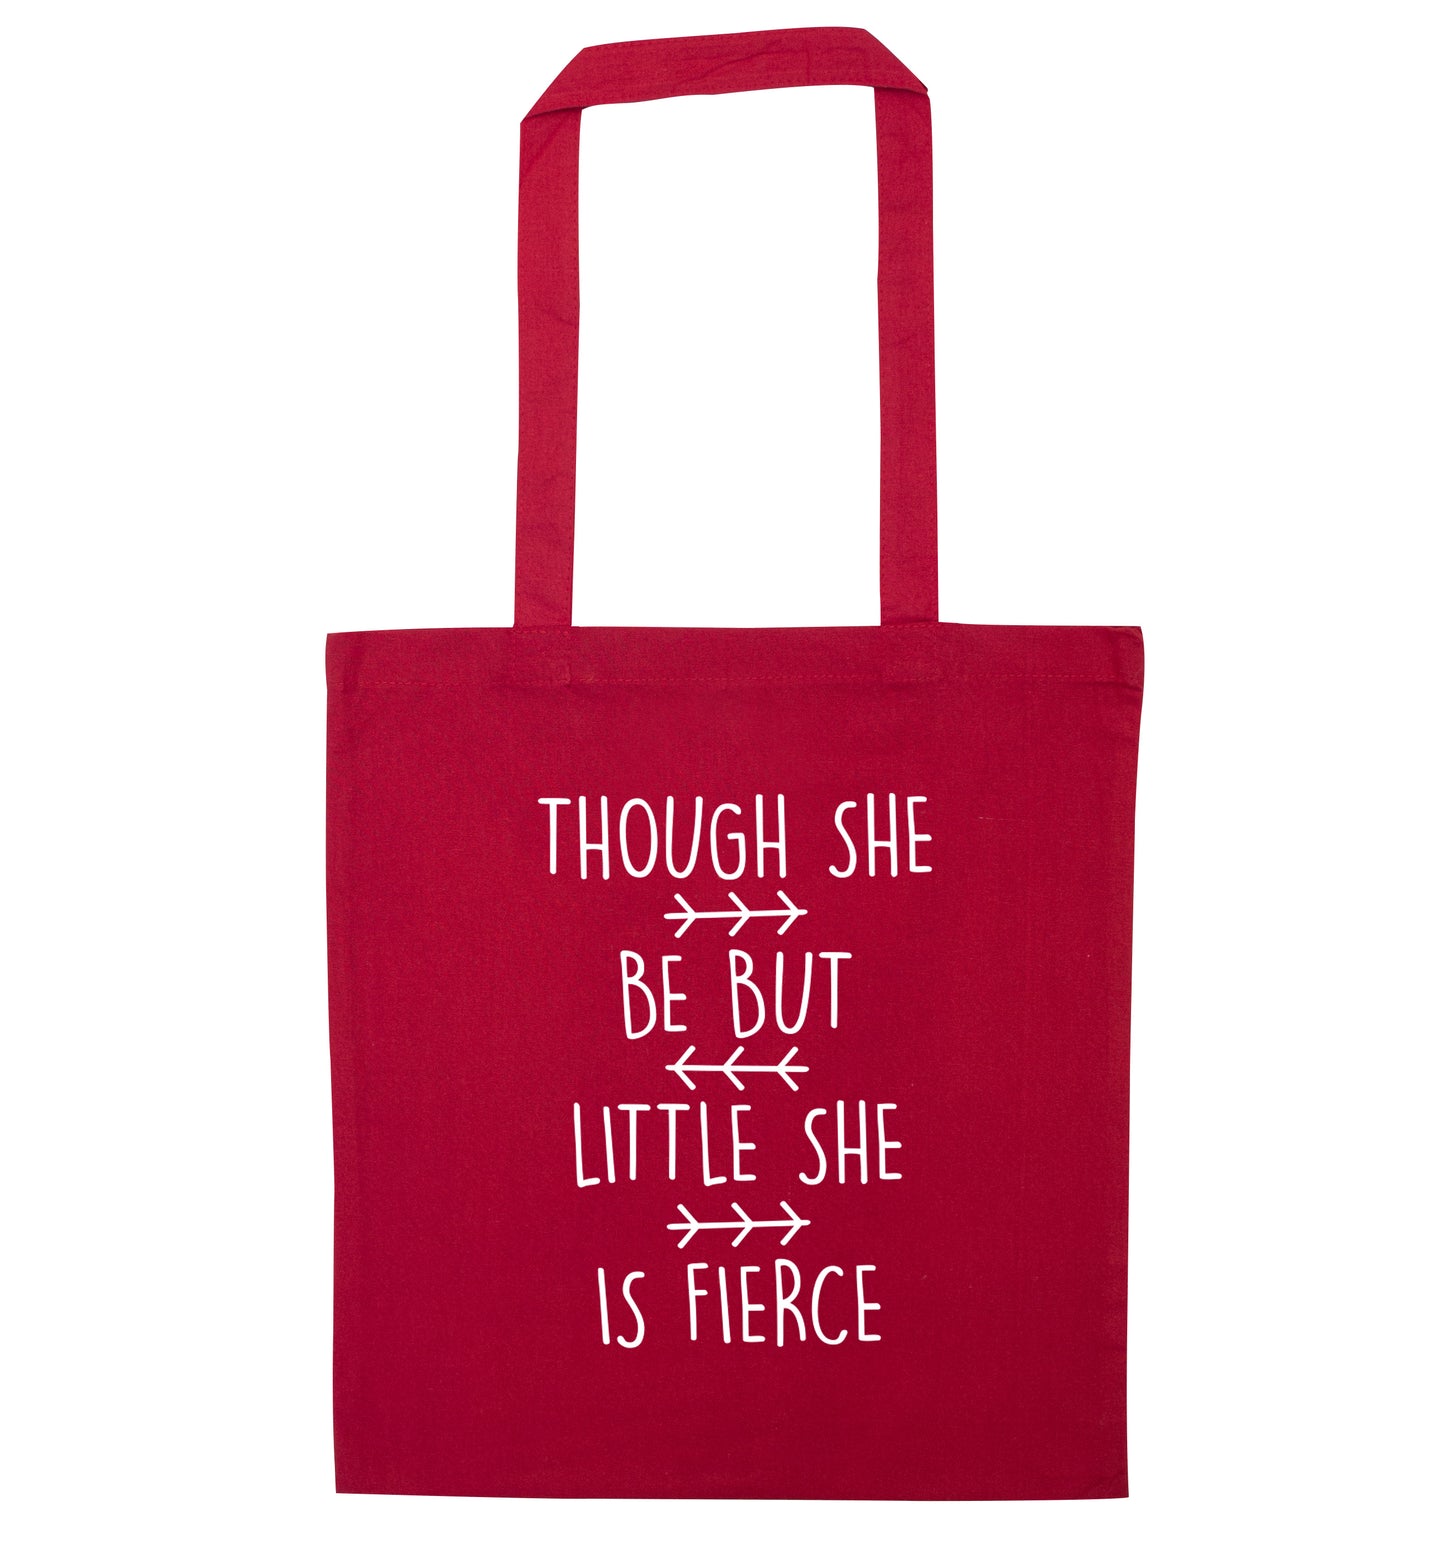 Though she be little she be fierce red tote bag